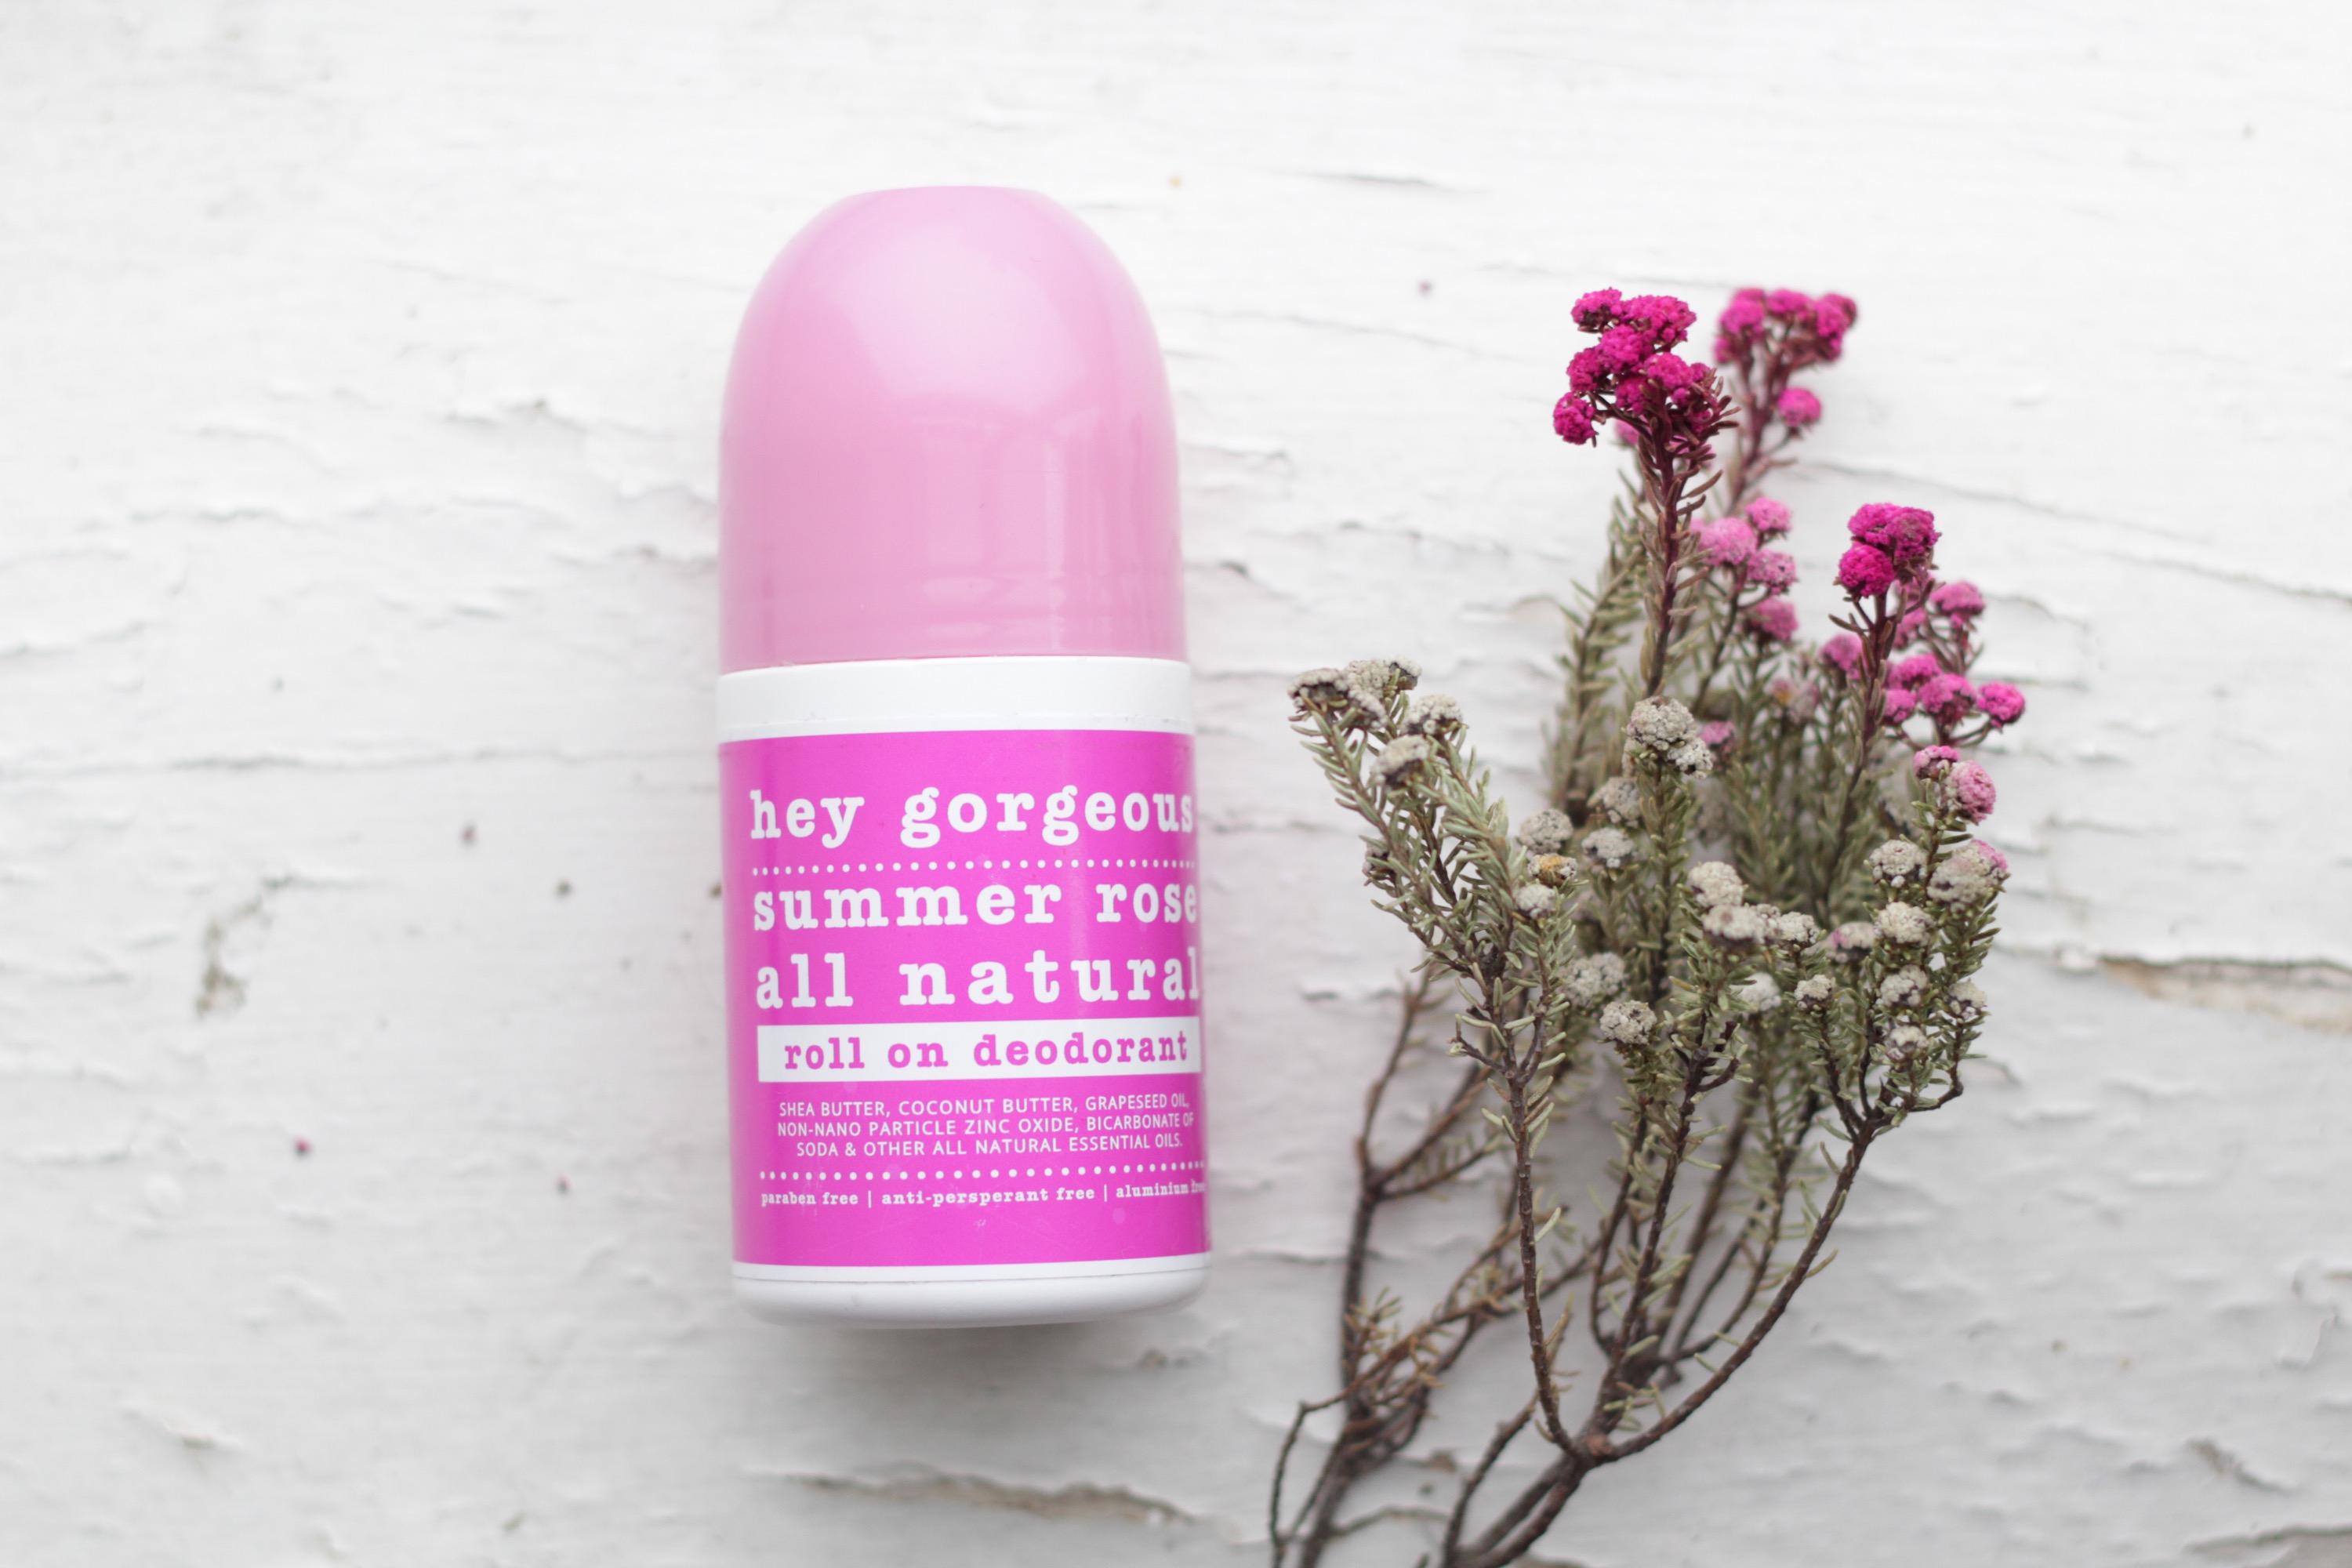 hey gorgeous natrual deo review #lovelocal